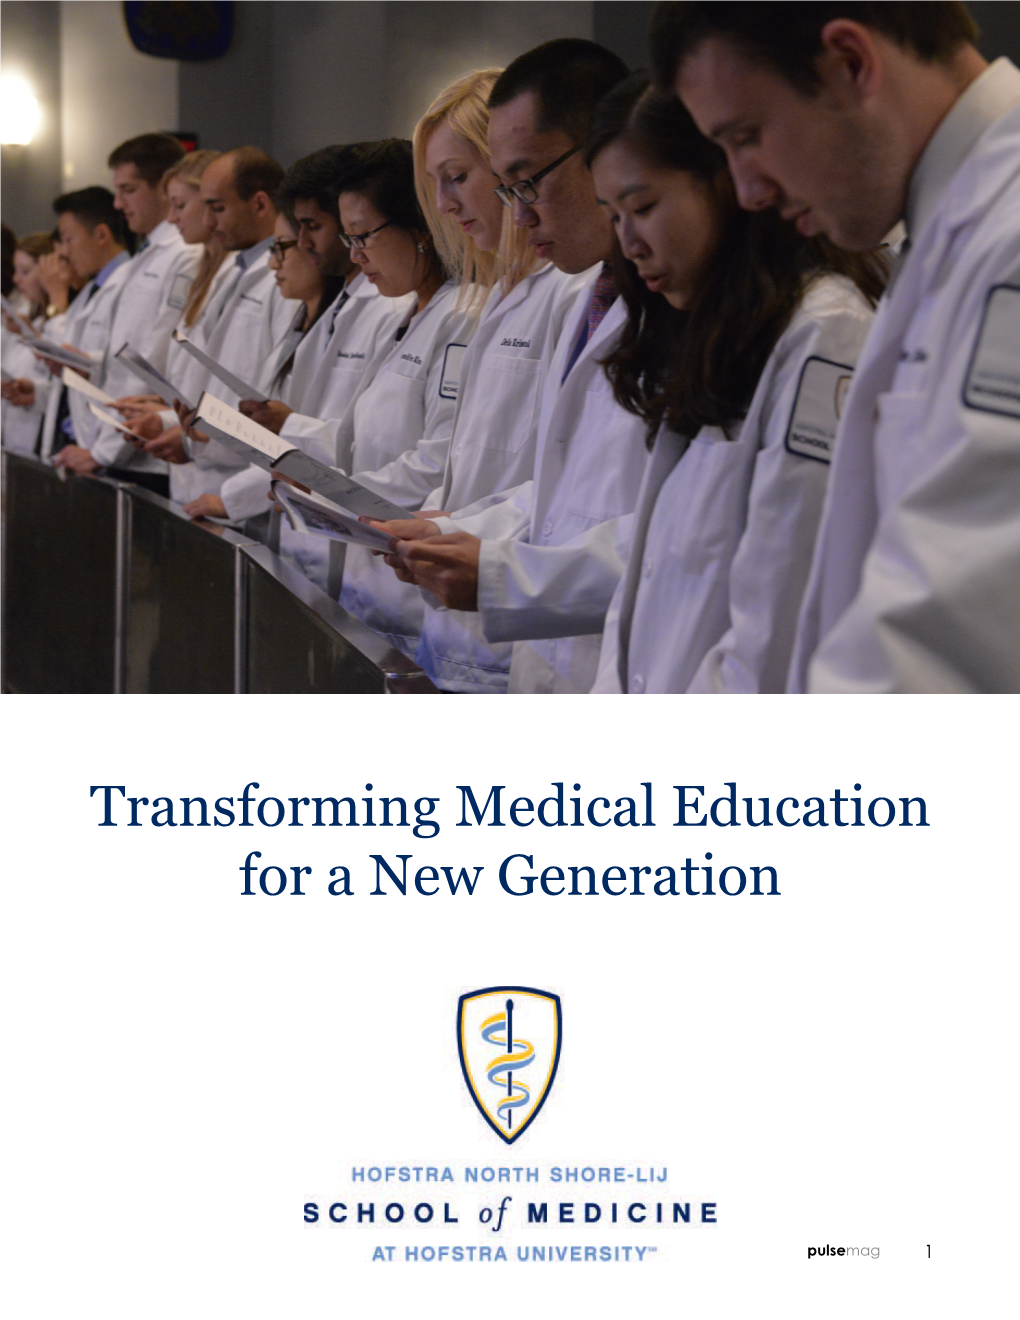 Transforming Medical Education for a New Generation